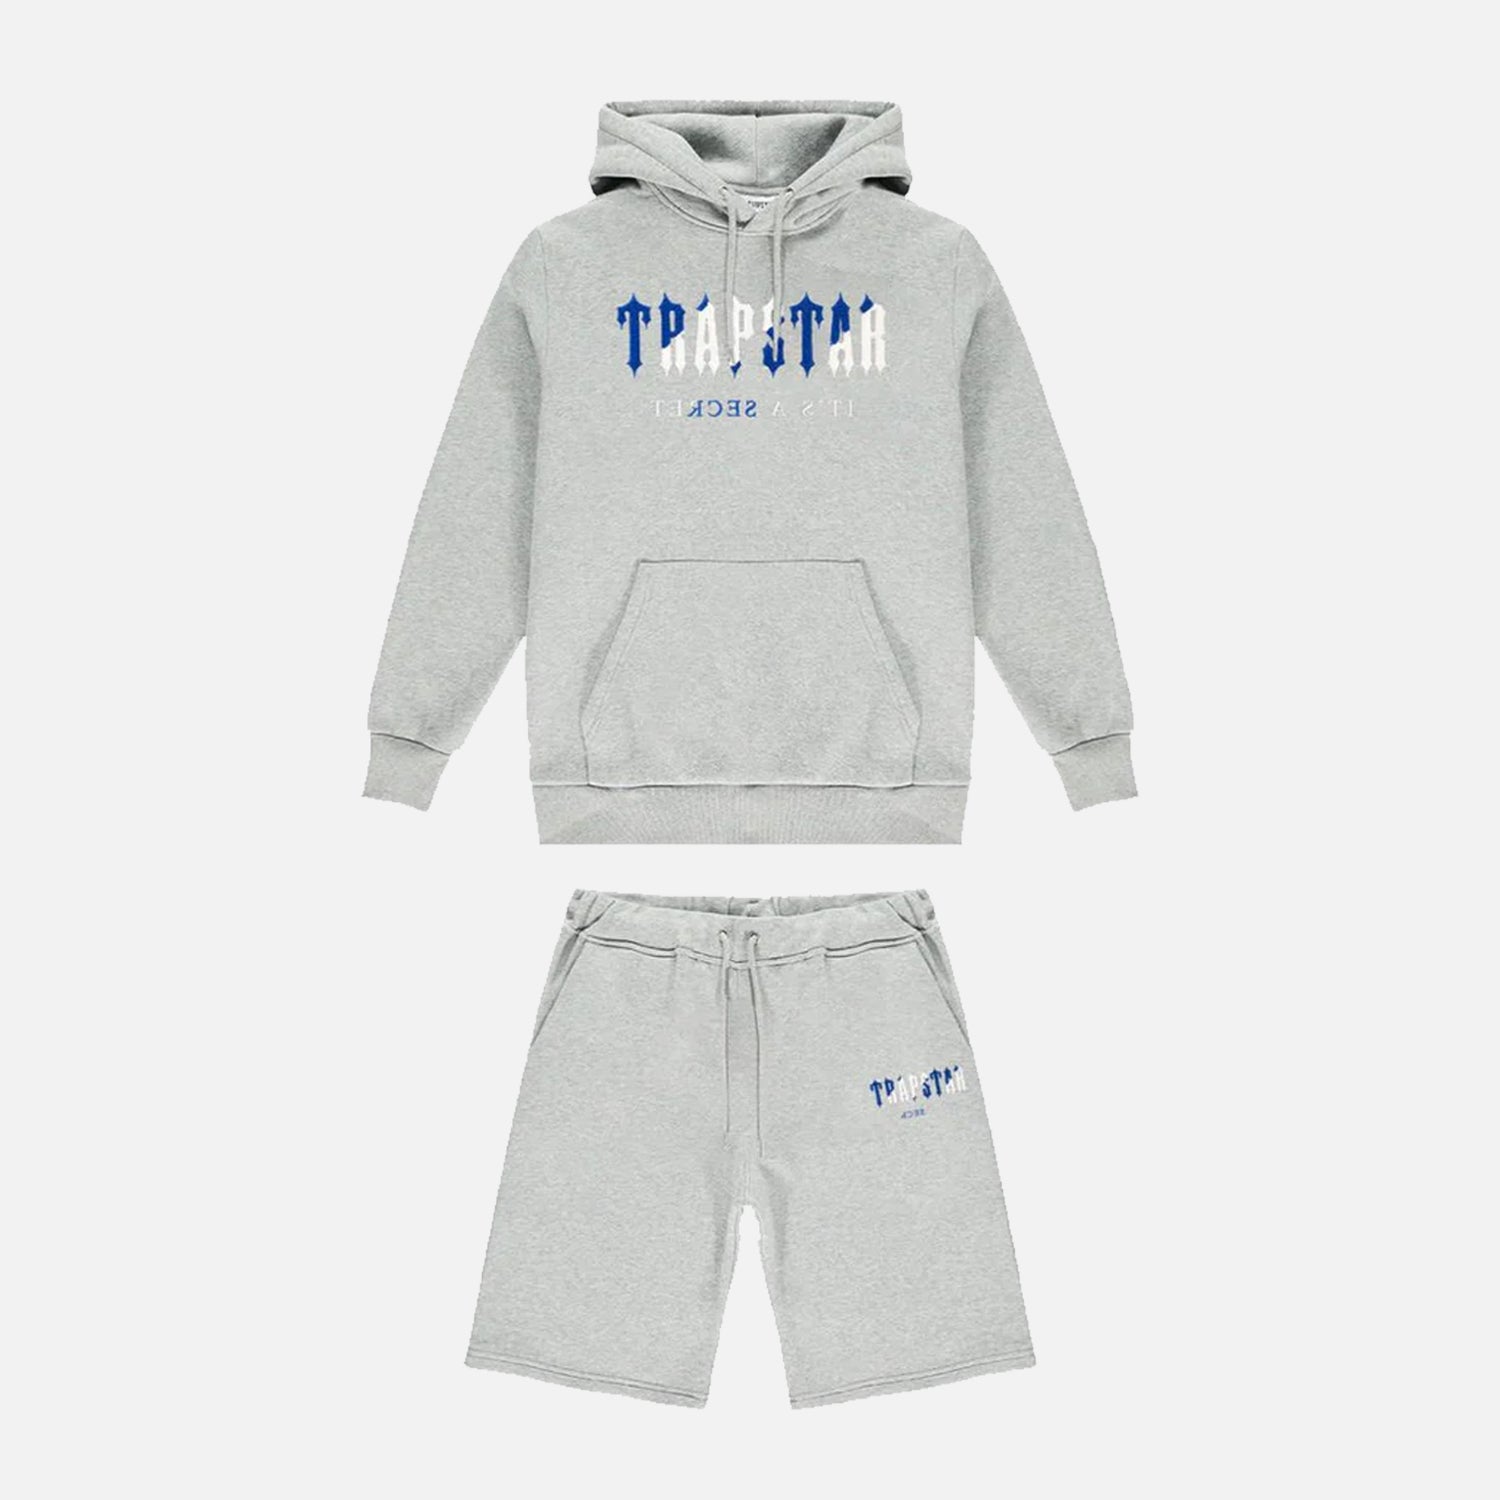 Trapstar Chenille Decoded Hooded Short Set - Grey / Dazzling Blue